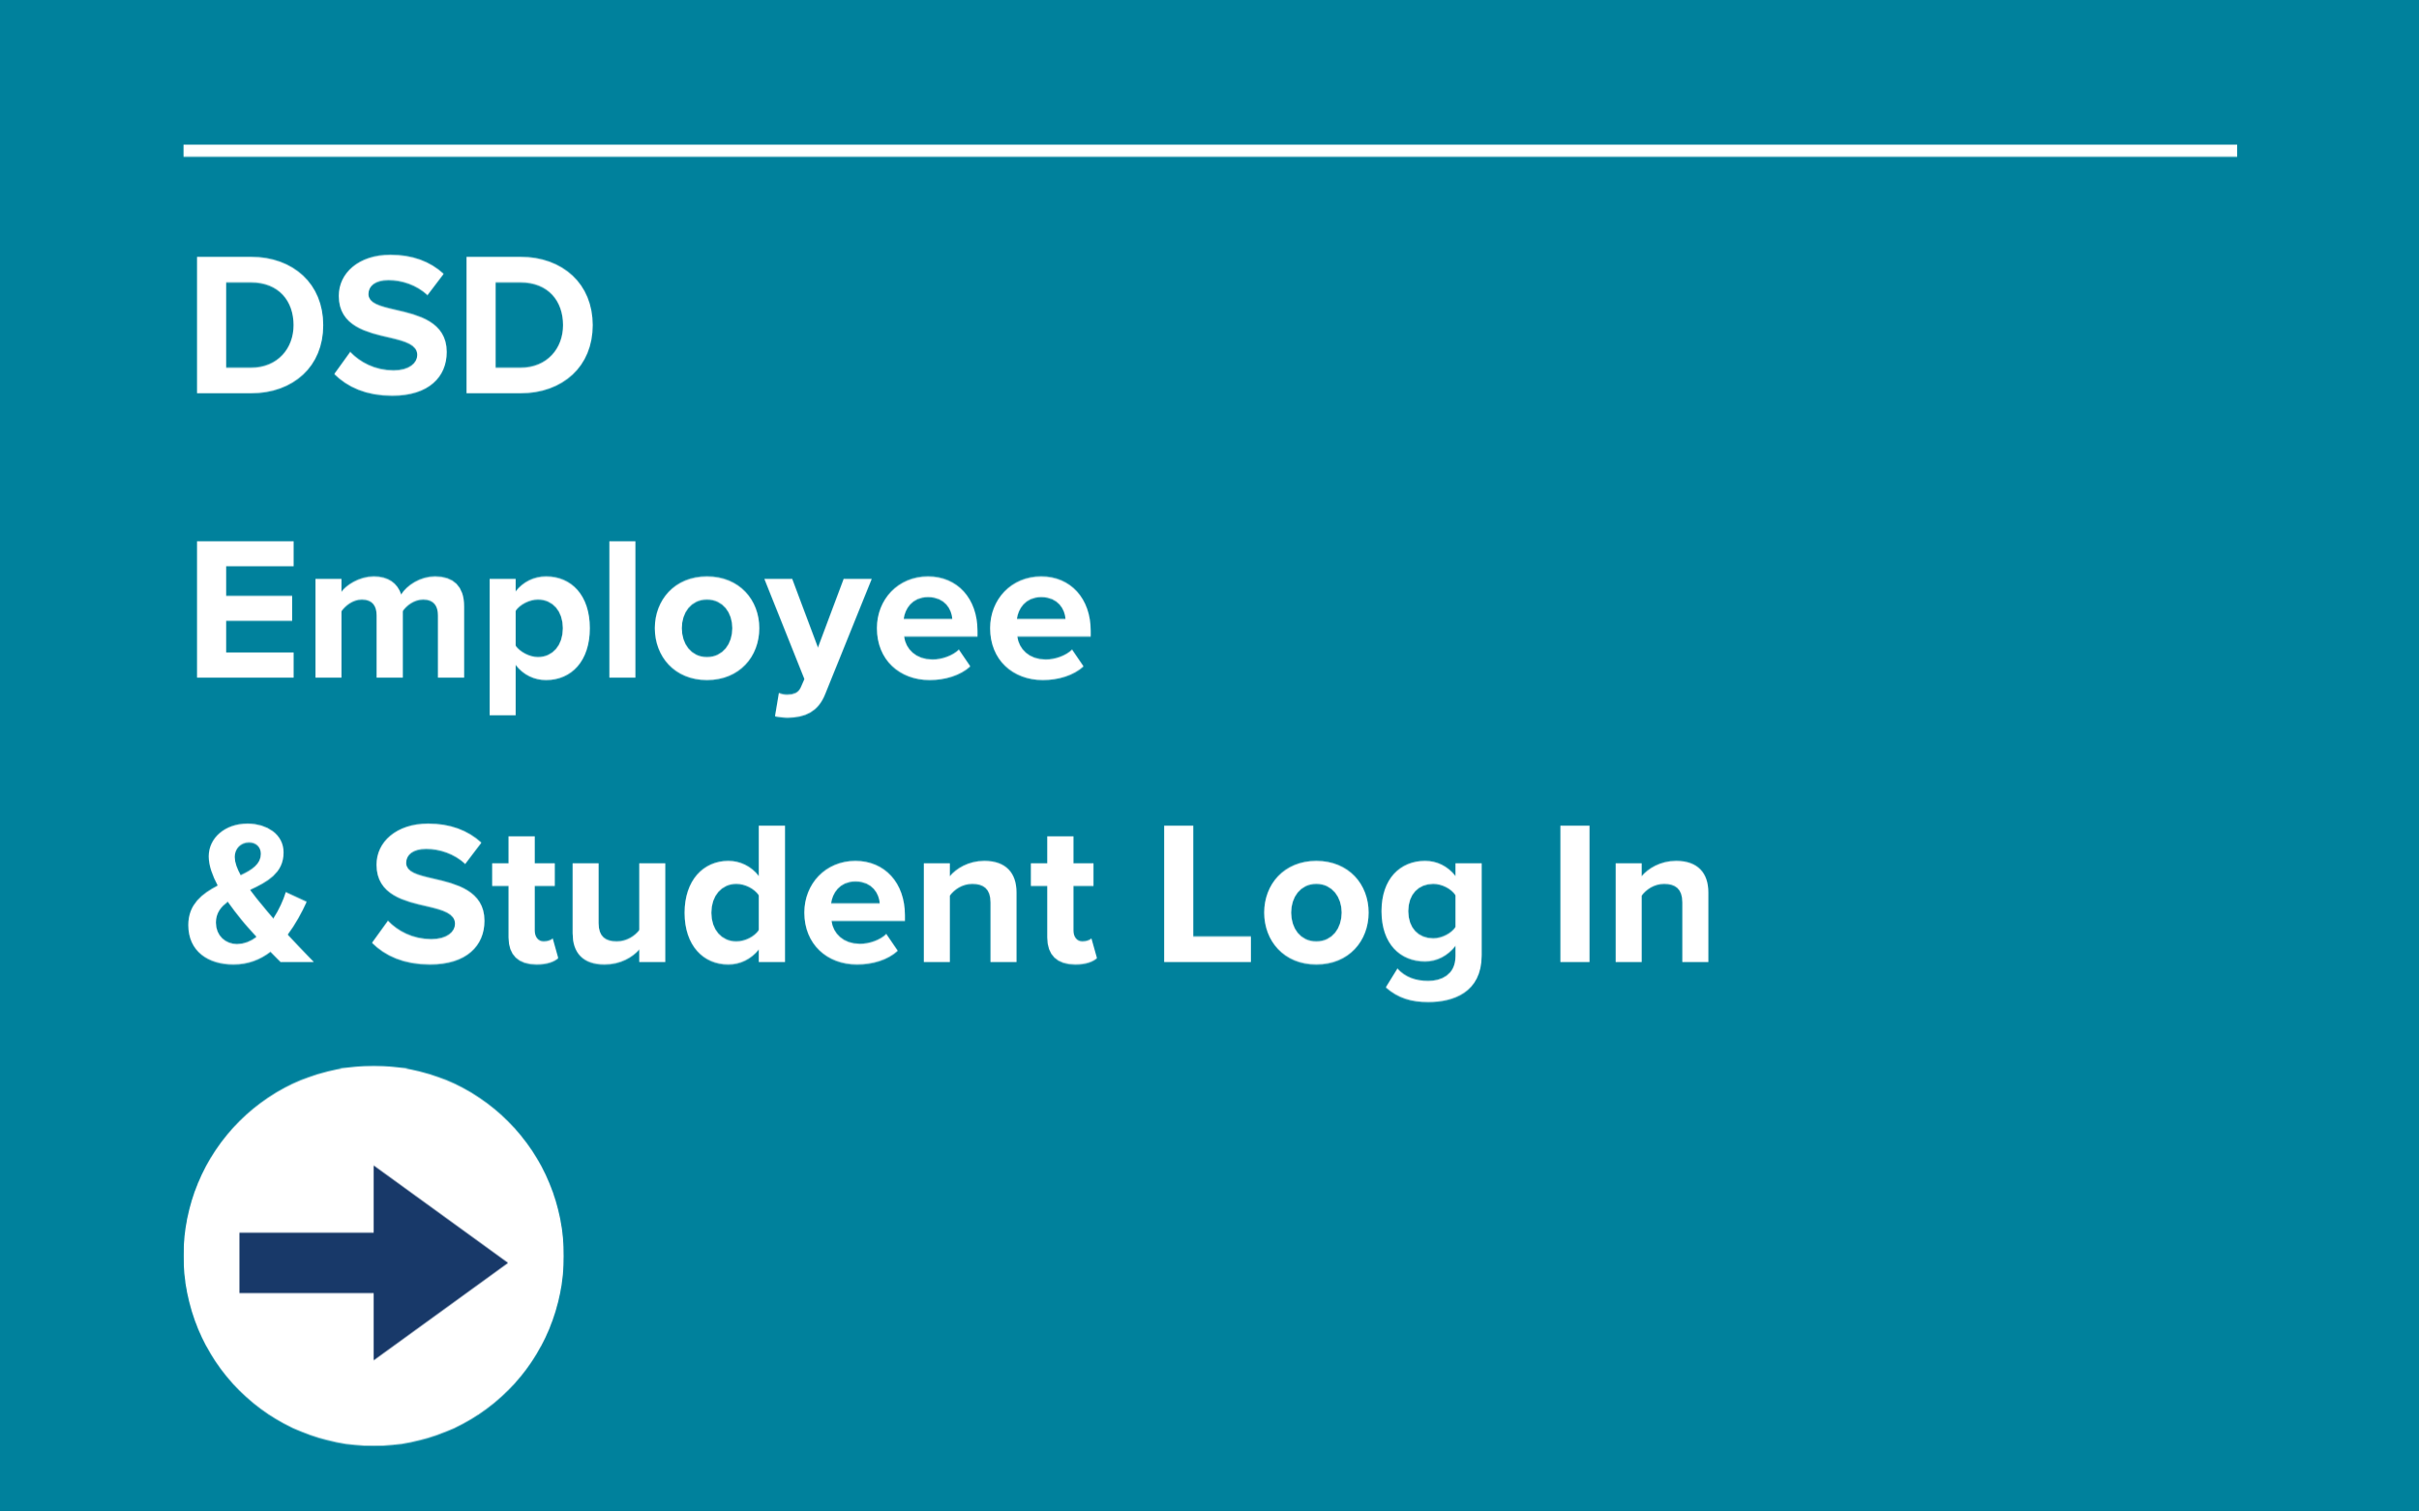 DSD Employee & Student Log In